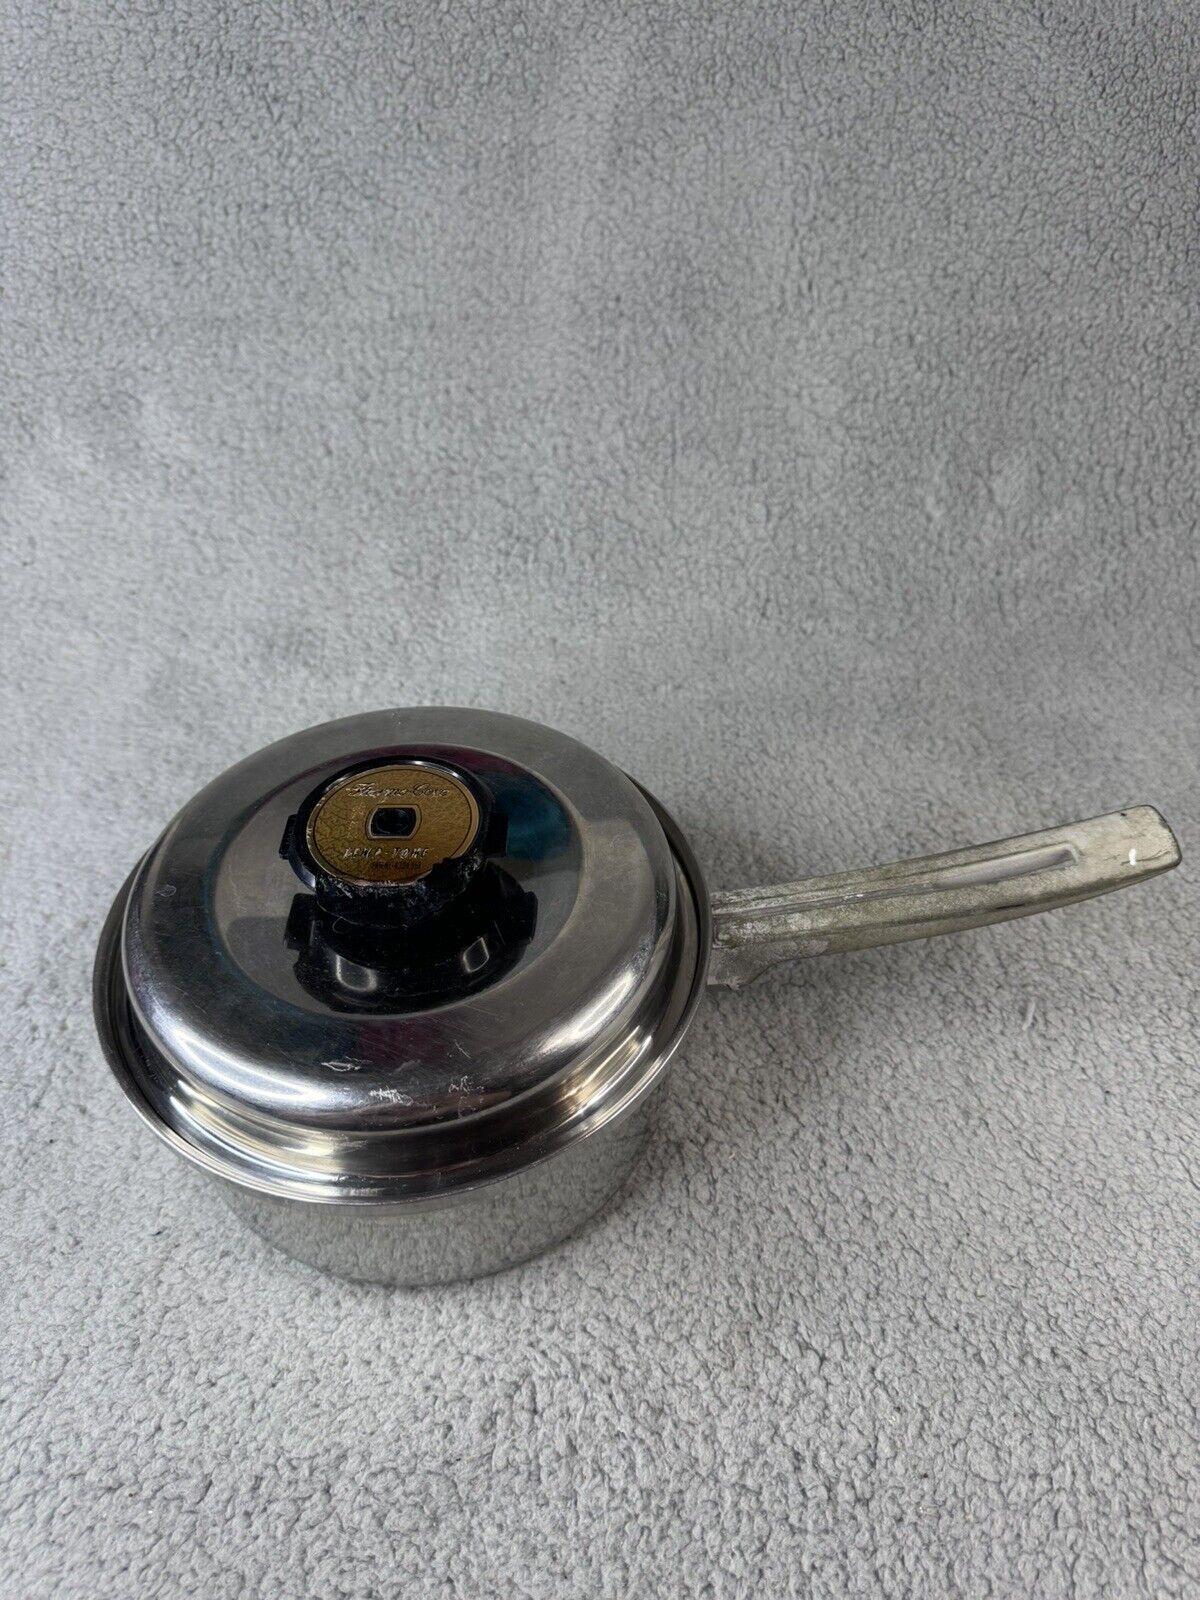 Vintage Thermo Core Temp-Tone Multi-Plex Stainless Steel Pot With Lid 8.5”